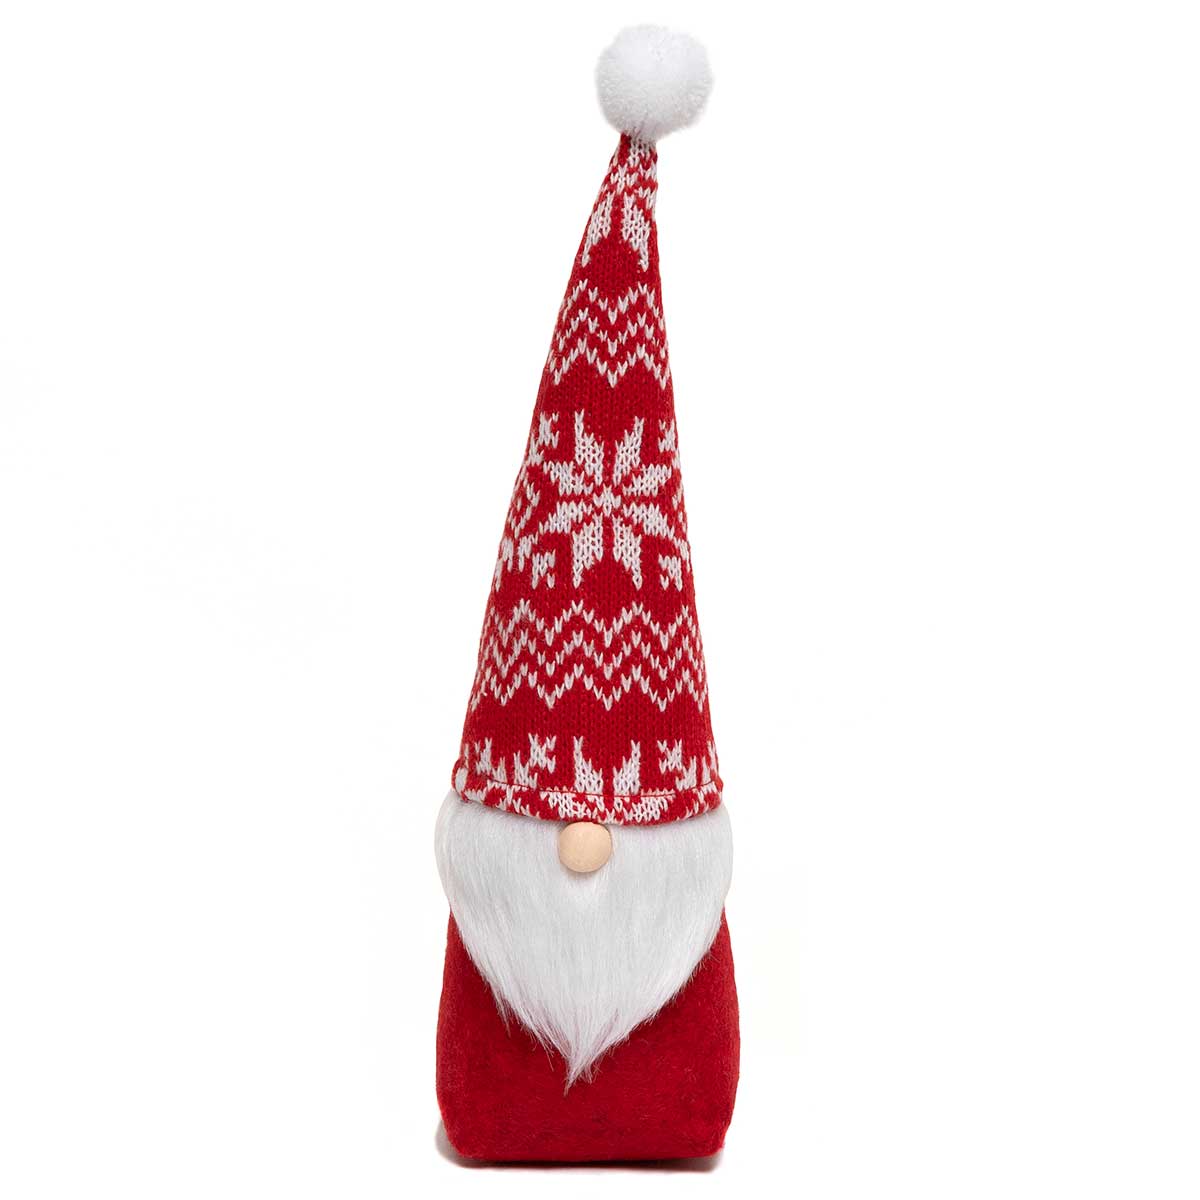 !TOMTE HOLIDAY GNOME WITH SWEATER HAT LARGE